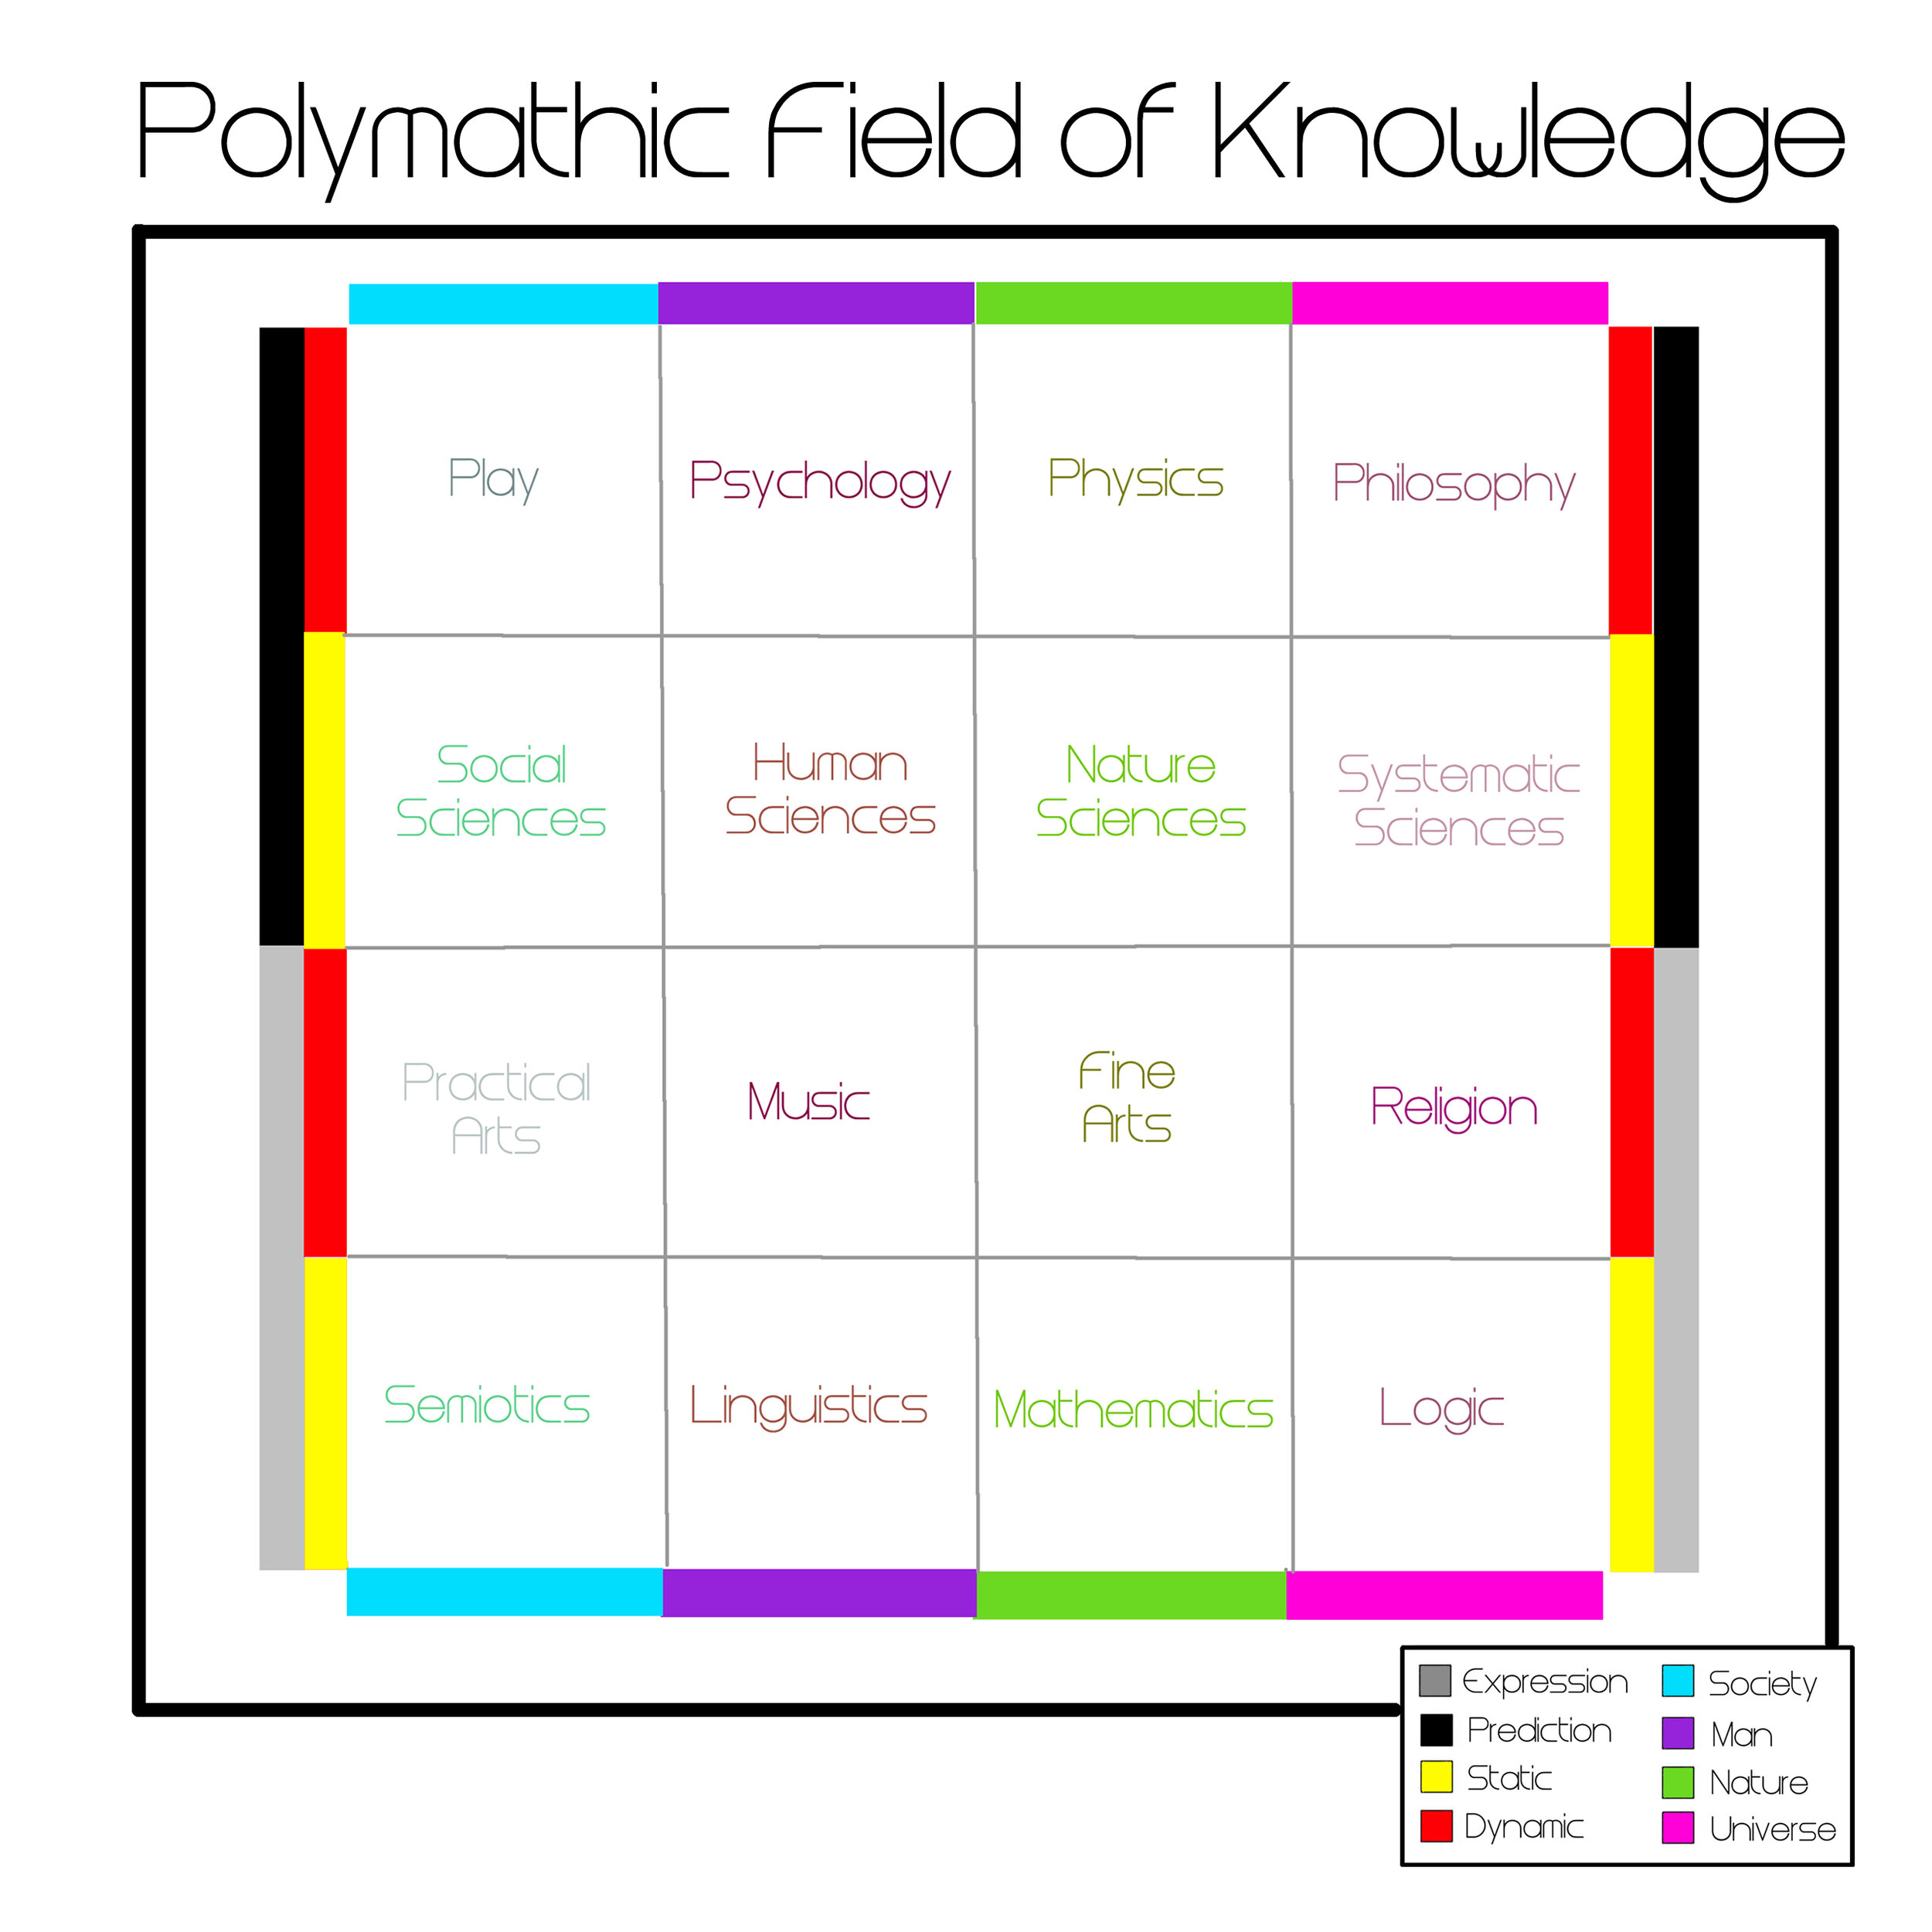 polymathic field of knowledge complete.jpg